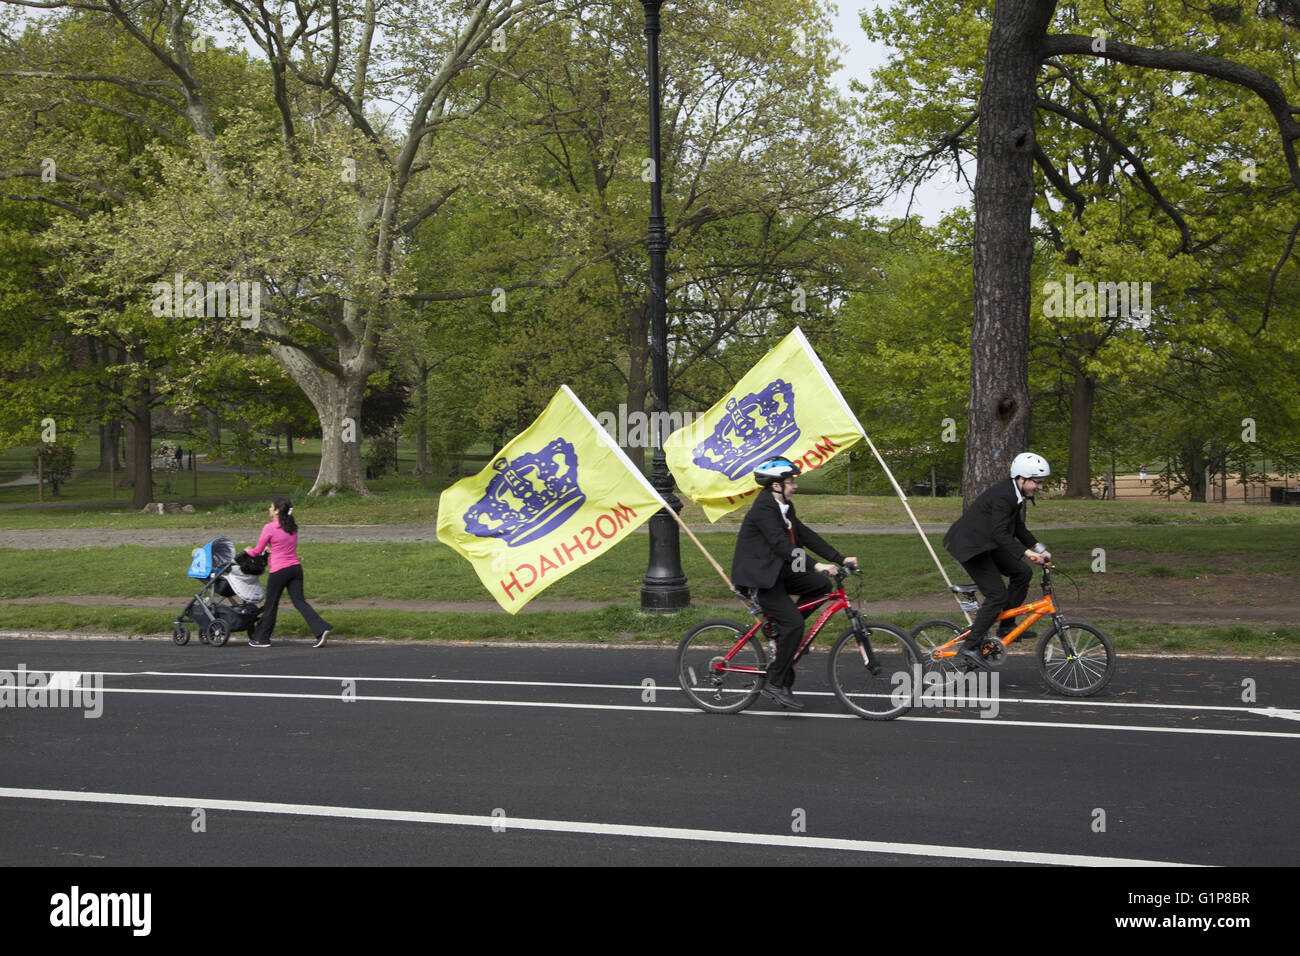 People enjoy a spring day in Prospect Park, Brooklyn, NY. Jewish boys ride bikes carrying flags praising Moshiach the messiah. Stock Photo